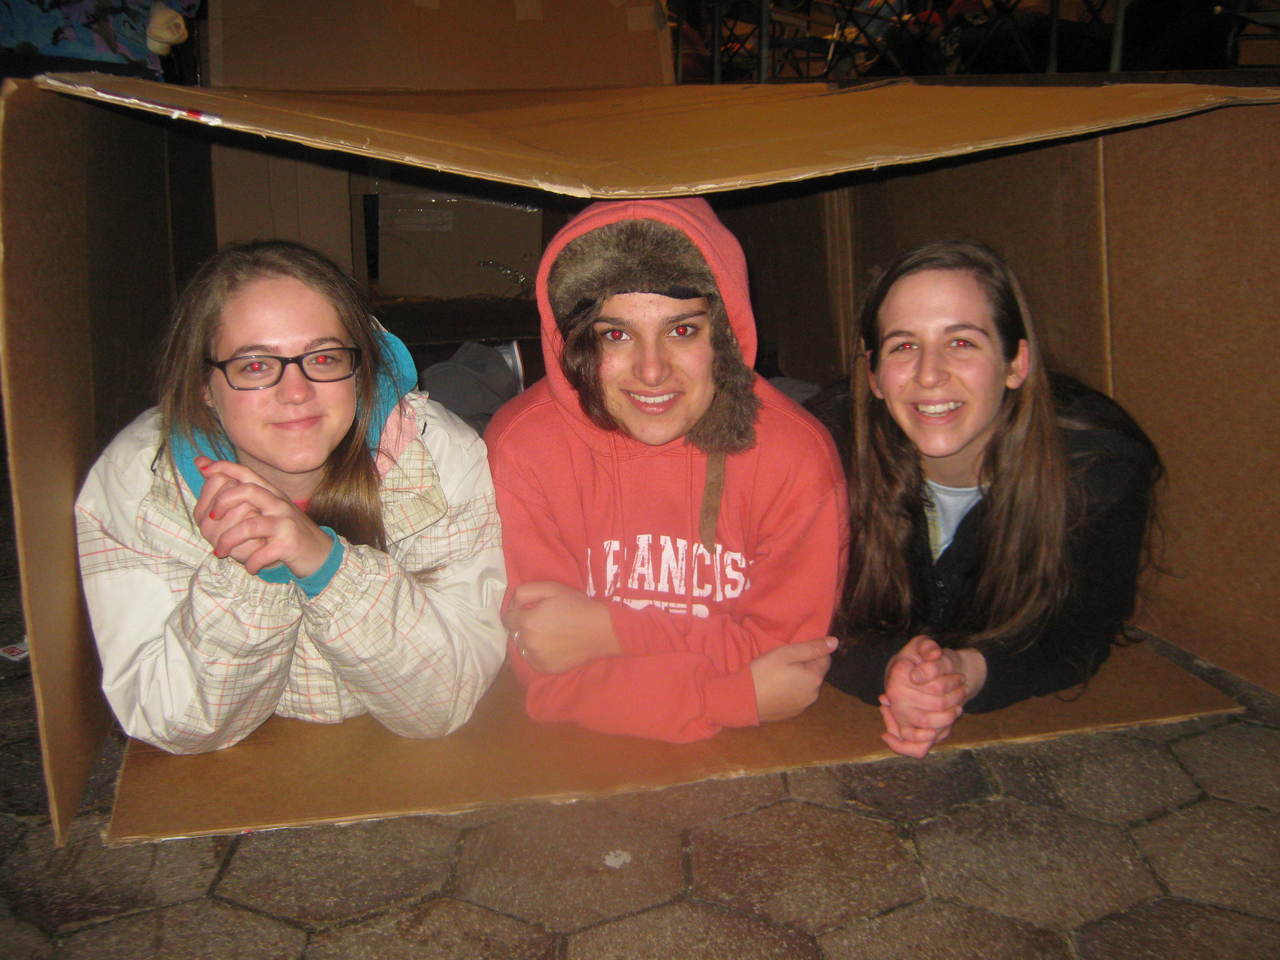 HUDDLED TOGETHER: From left to right, Prout School, Wakefield students Sarah Iselin, Chandler Dupre and Tory Kern see what it is like to sleep in a cardboard box as they prepare to spend the night on the grounds of the Cathedral of SS. Peter and Paul, Providence for the ‘Sleep Out.’ The event offered the students a closer look at issues of homelessness.